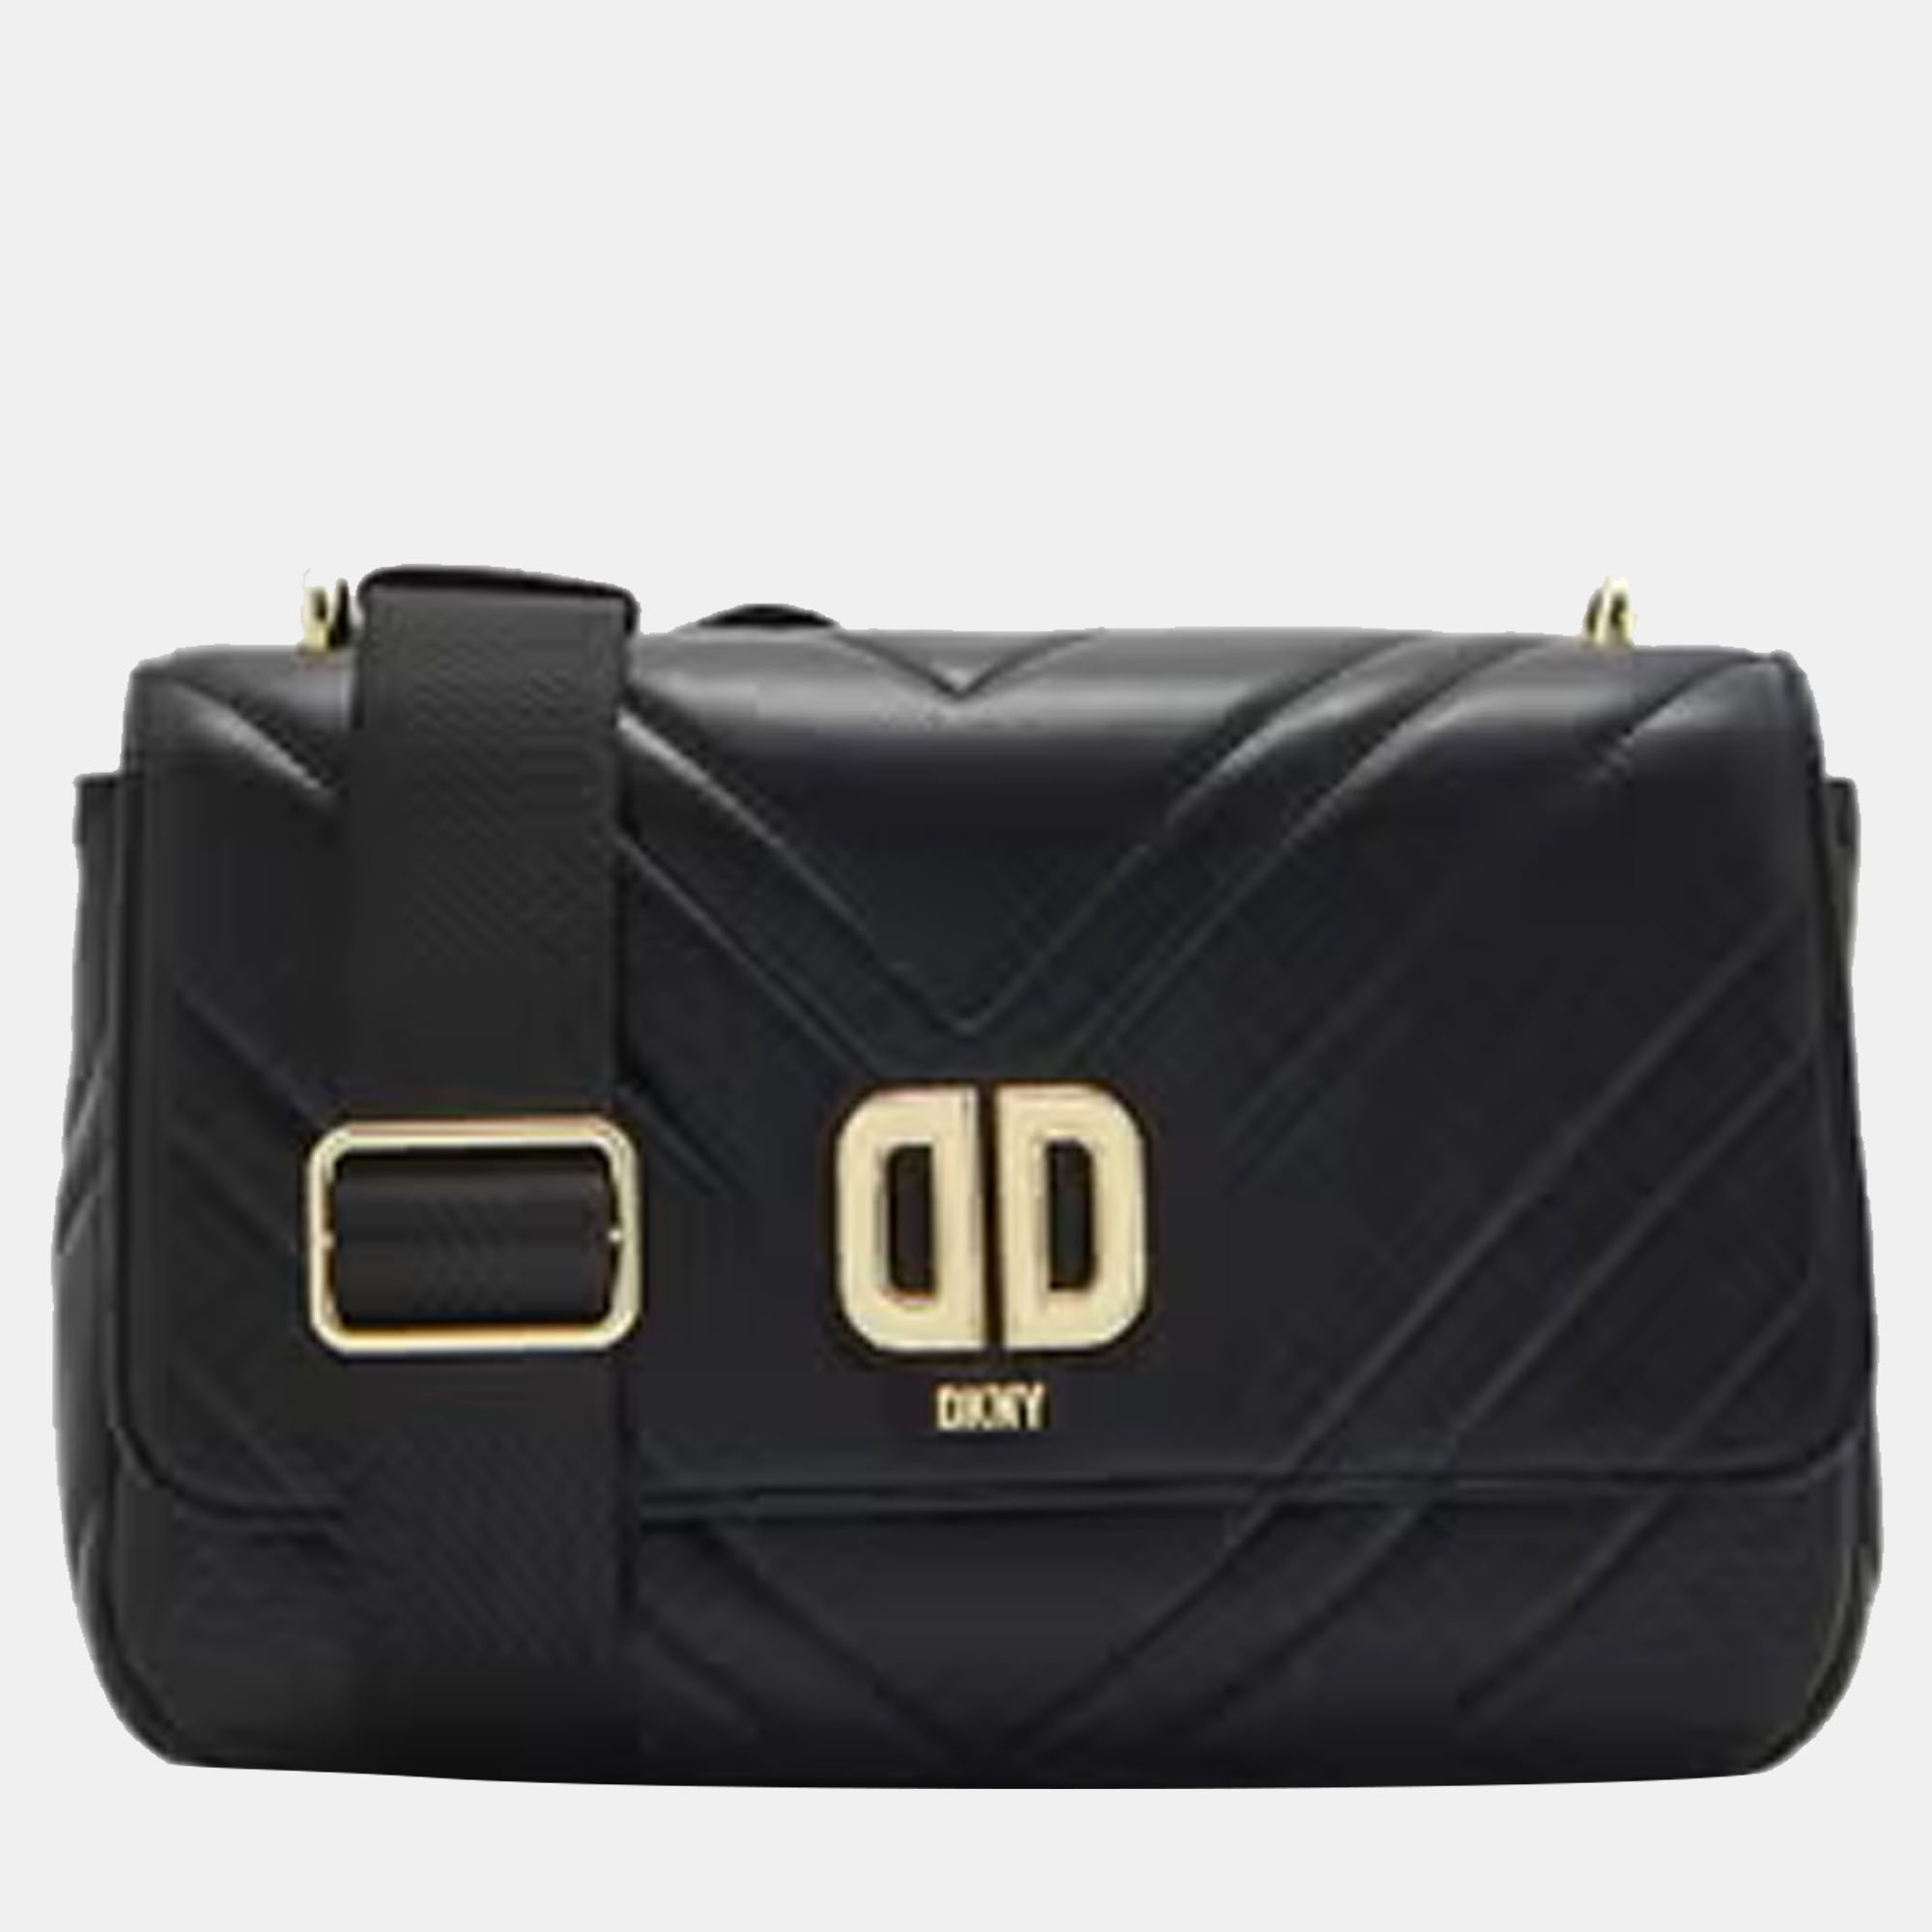 Pre-owned Dkny Black Leather Crossbody